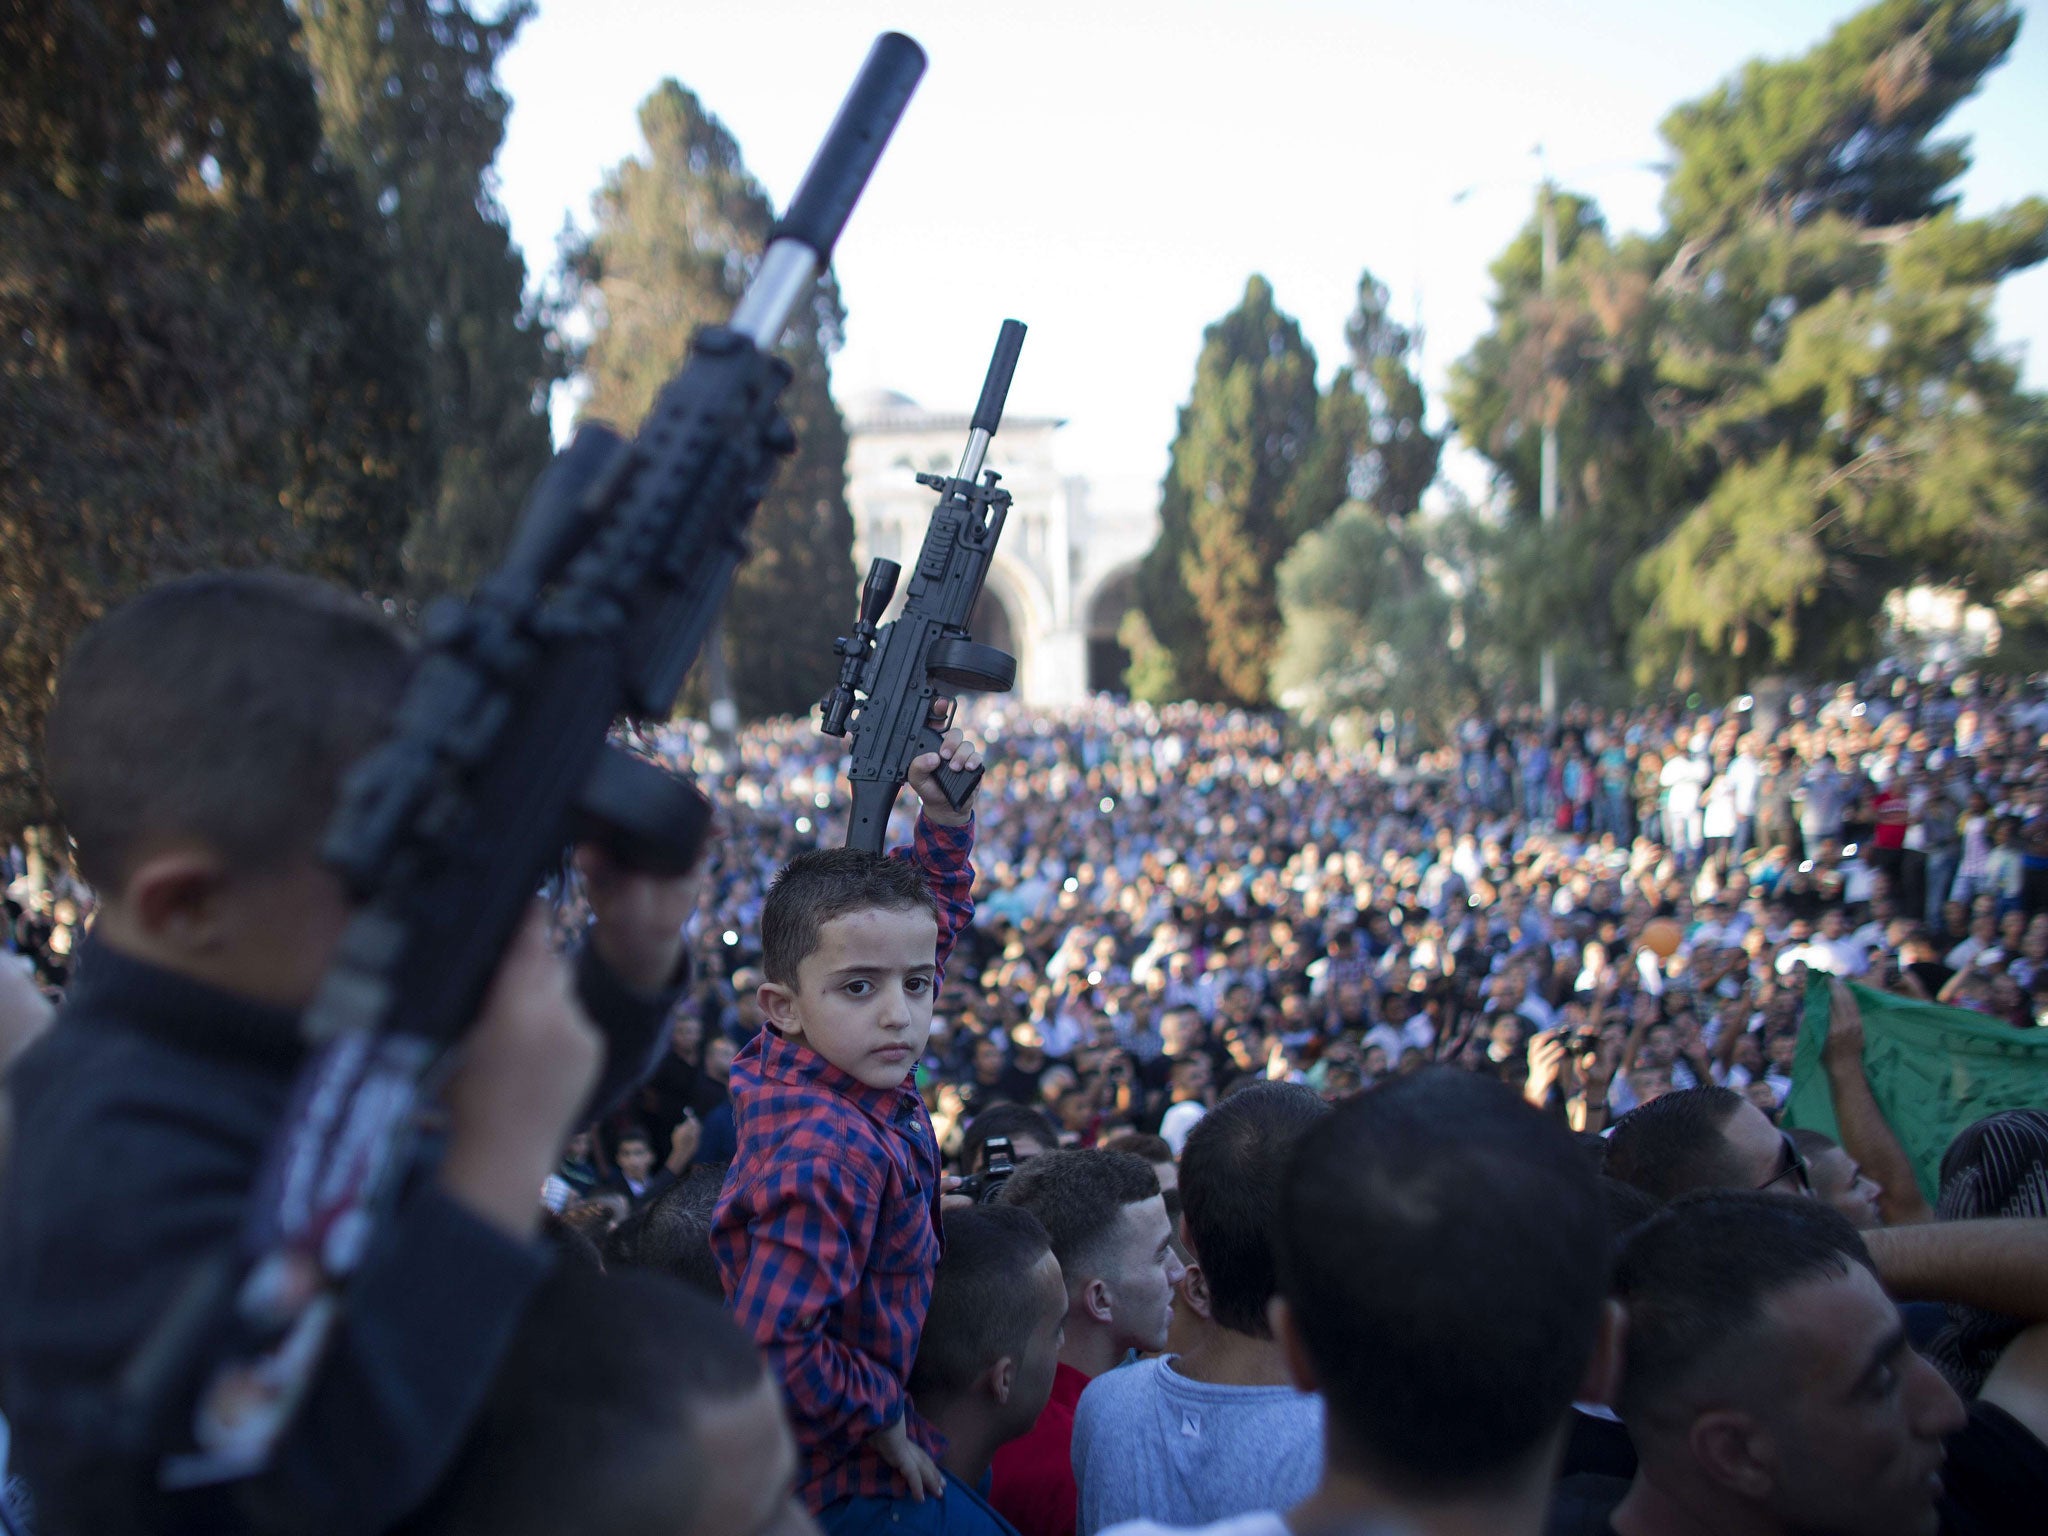 Palestinian children hold up plastic guns during a demonstration against Israel's military offensive on the Gaza Strip following Eid Al-Fitr prayers on July 28, 2014, 2011 in front of the Dome of Rock at al-Aqsa mosque compound, Islam's third most holy si